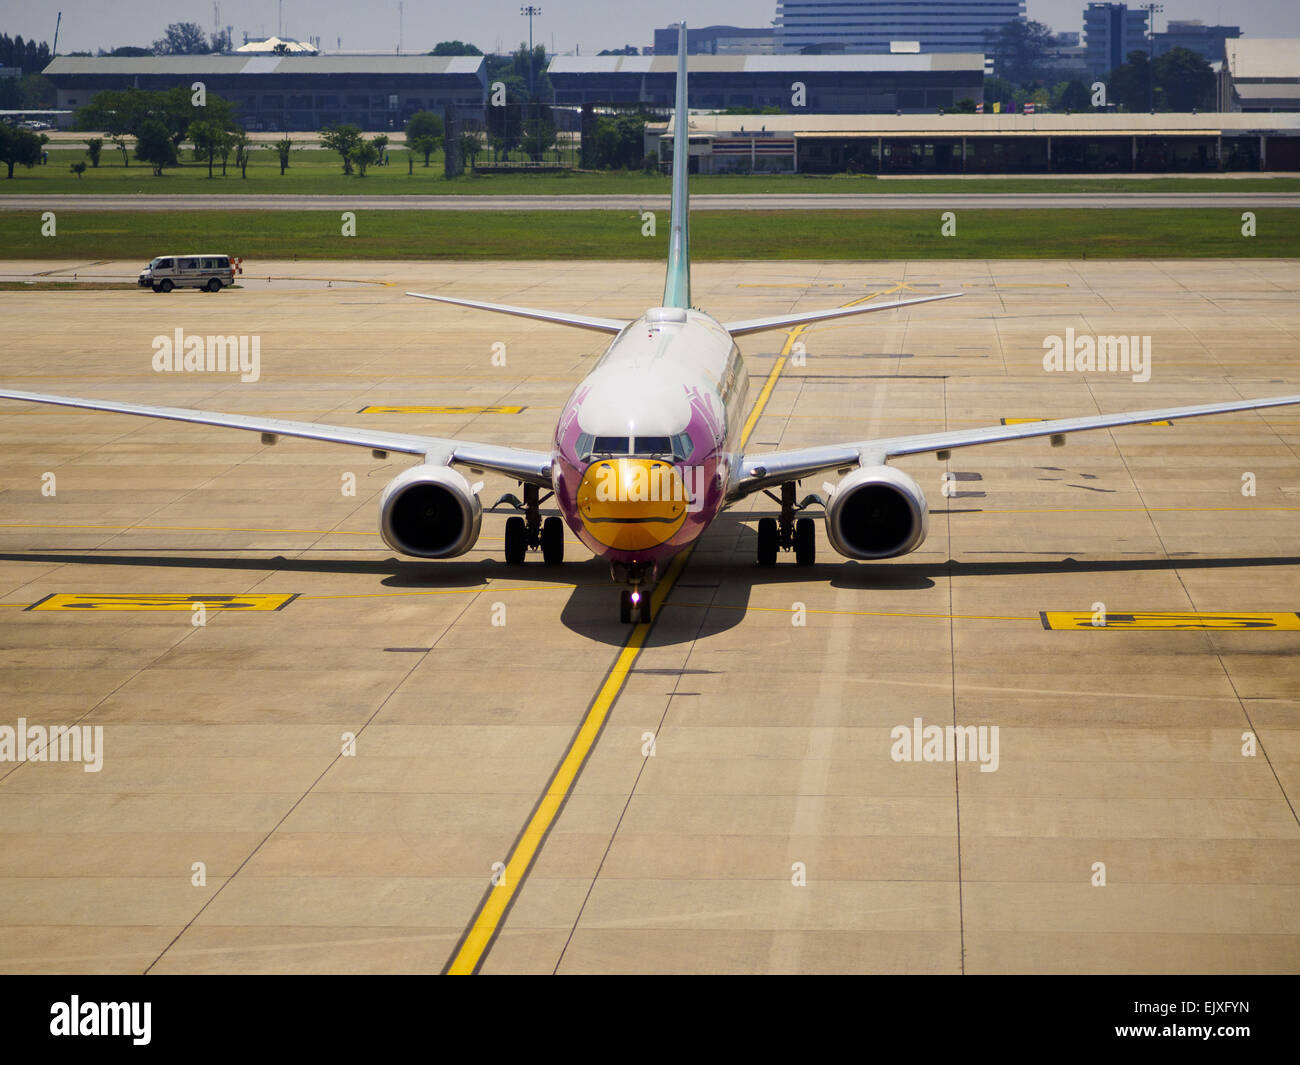 Bangkok, Thailand. 2nd Apr, 2015. A NOK Airlines Boeing 737 taxis to a gate at Don Mueang Airport in Bangkok. The International Civil Aviation Organization (ICAO), a United Nations agency, issued a report critical of record keeping and maintenance reports for Thailand's civil aviation industry, including most Thai air carriers. The ICAO report allegedly showed that the Thai Department of Civial Aviation (DCA) was able to meet only 21 out of 100 ICAO requisites. Credit:  ZUMA Press, Inc./Alamy Live News Stock Photo